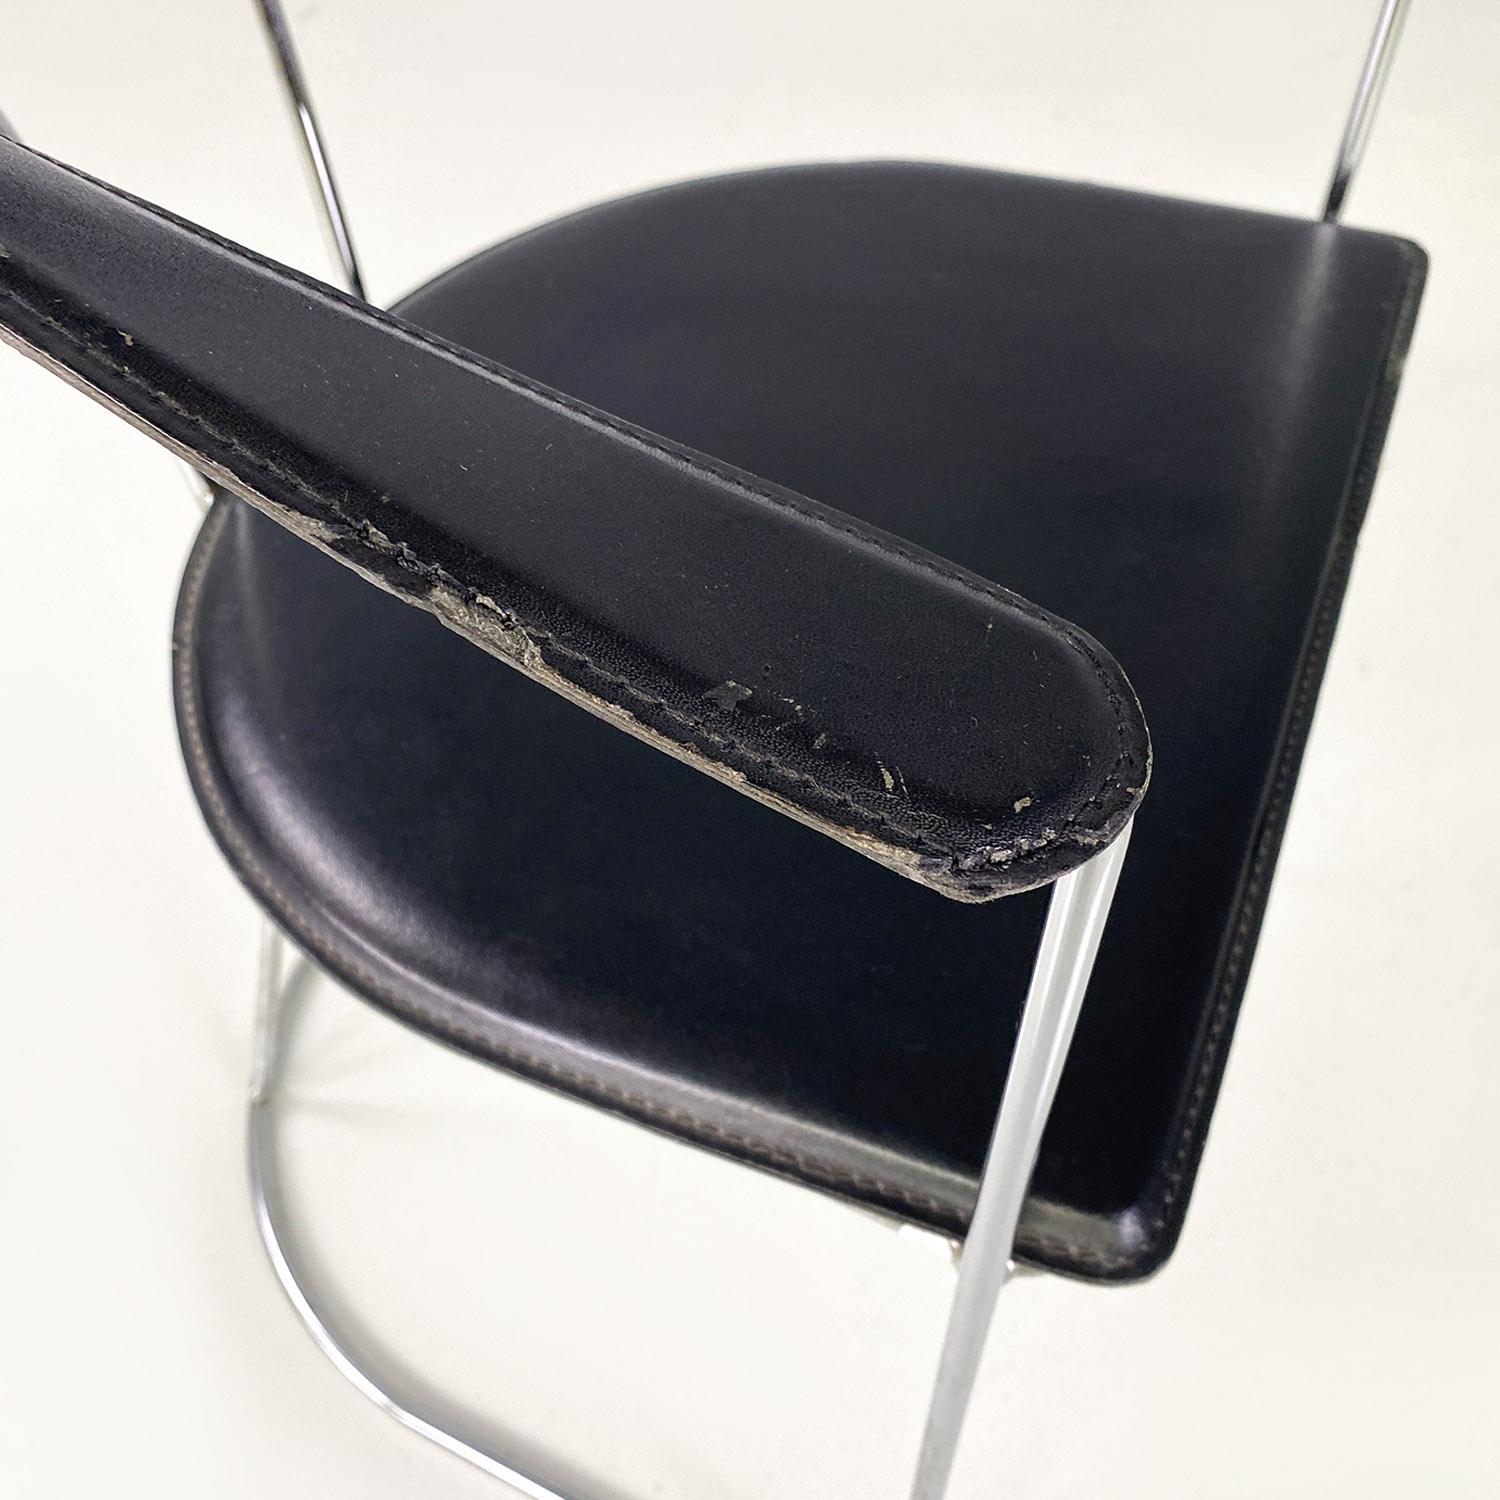 Italian modern chromed metal and black leather curved shape chairs, 1980s For Sale 4